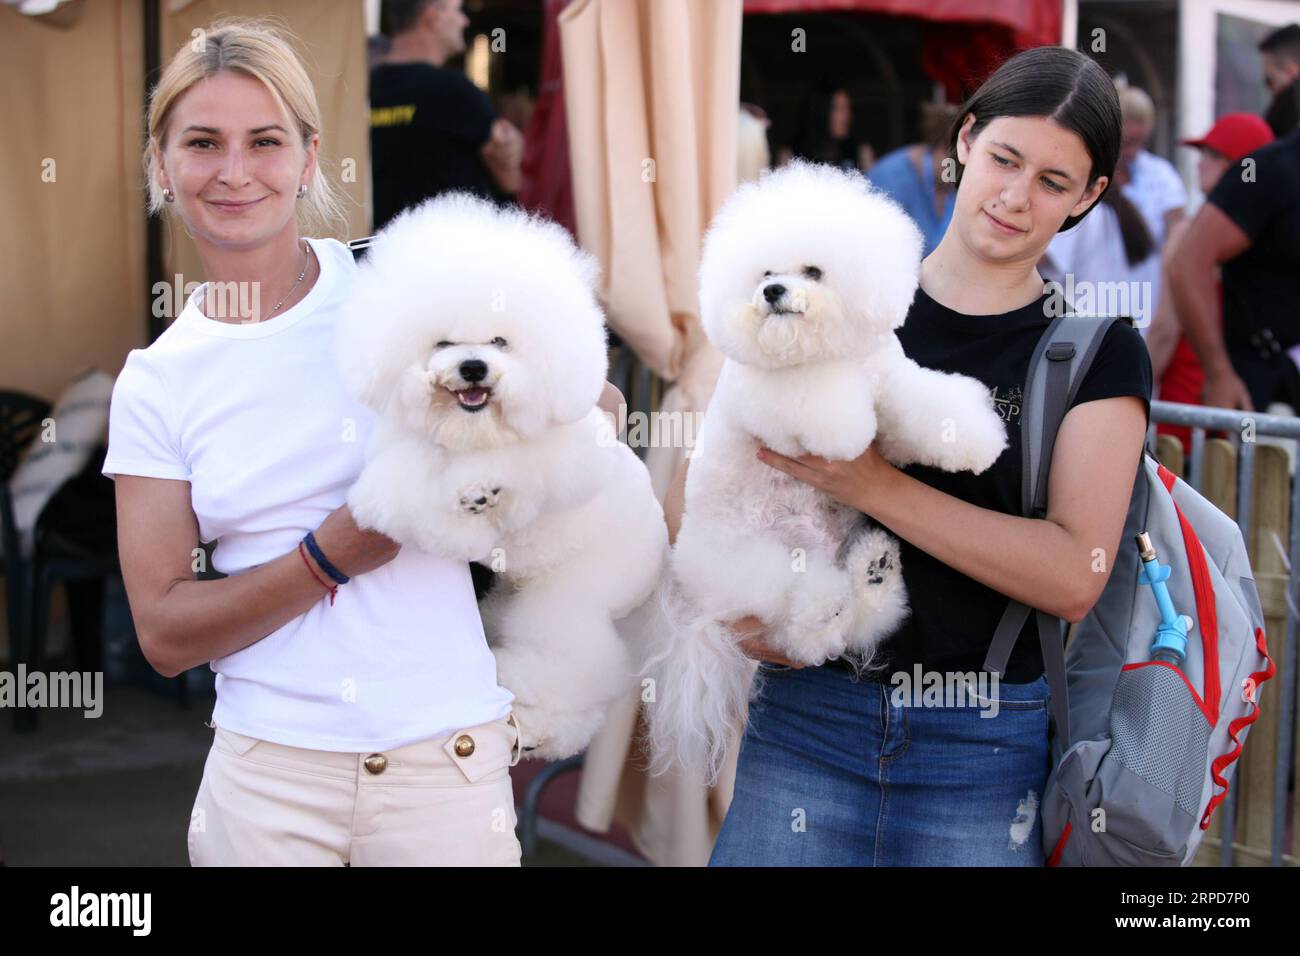 (190726) -- SPLIT, July 26, 2019 -- People carry their dogs at the Four Summer Night Dog Shows in Split, Croatia, July 25, 2019. ) CROATIA-SPLIT-SUMMER NIGHT DOG SHOWS MirandaxCikotic PUBLICATIONxNOTxINxCHN Stock Photo